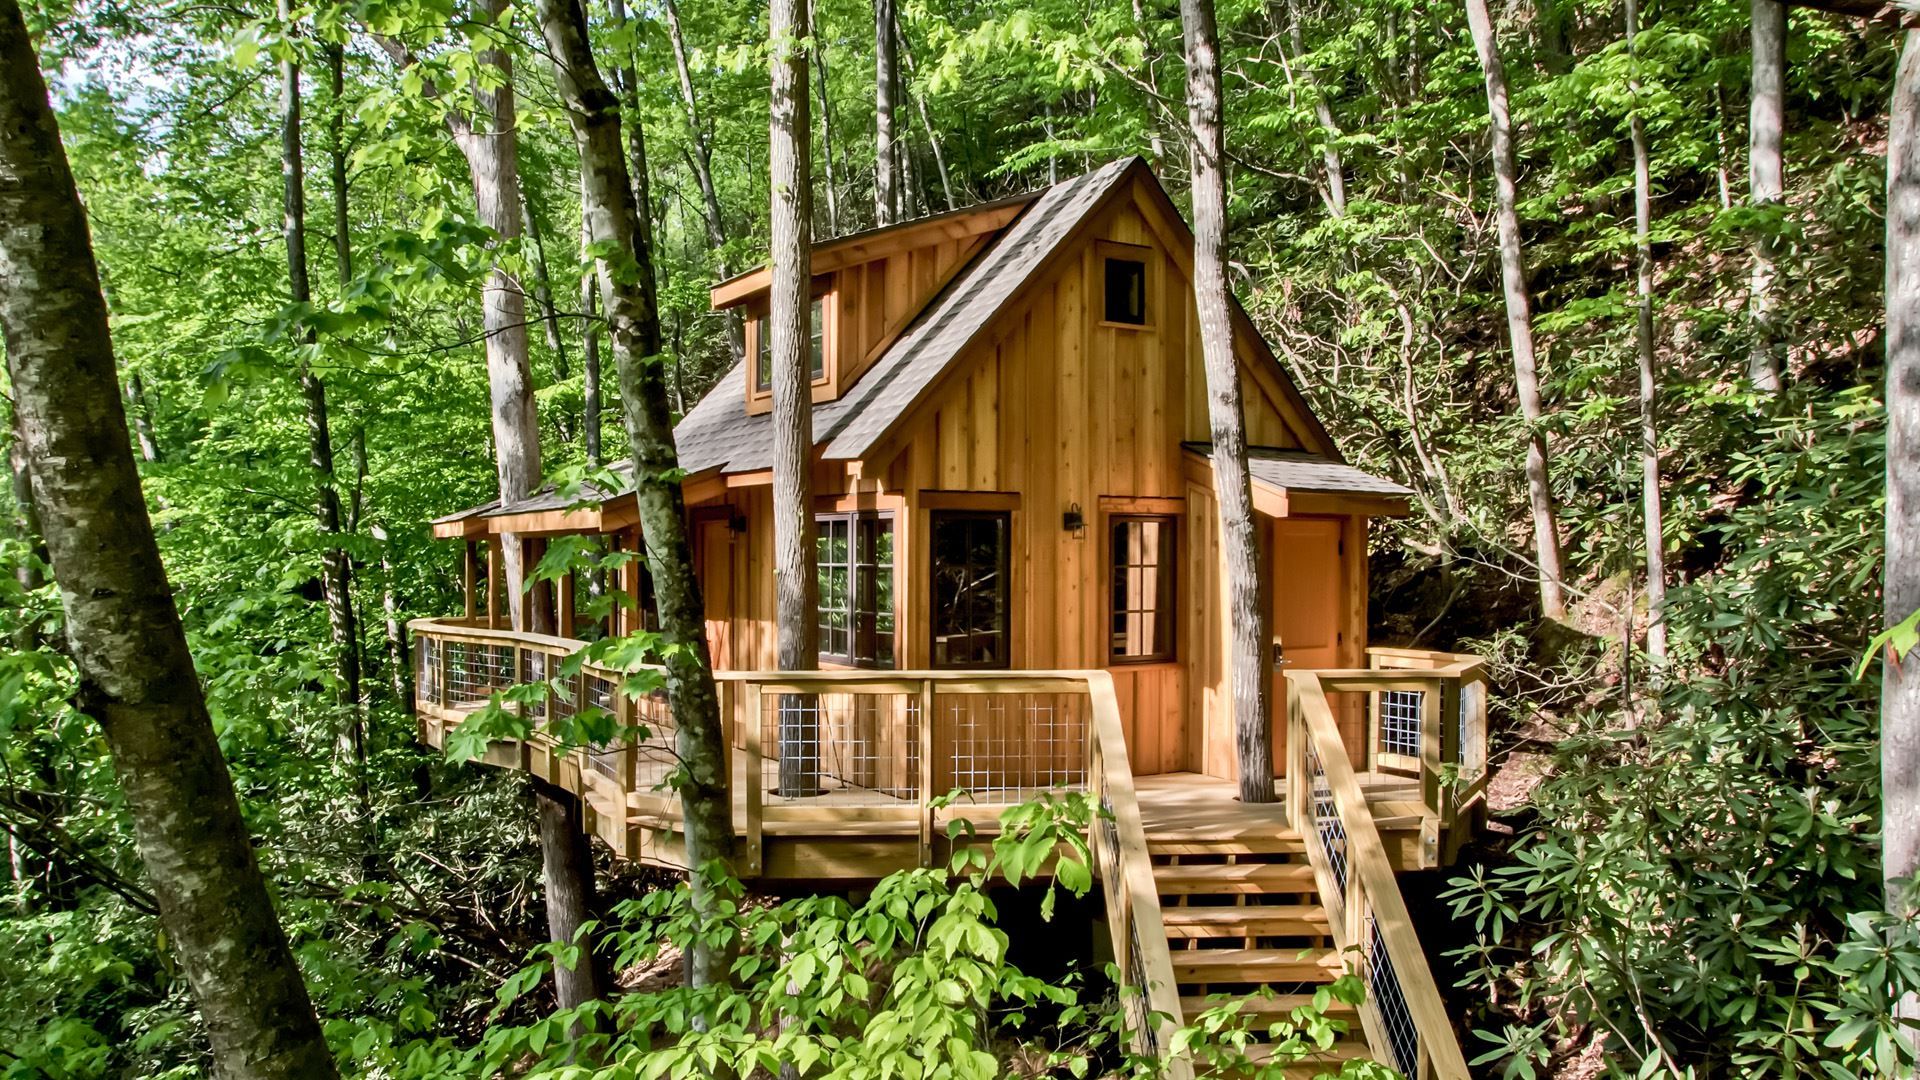 This Treehouse Grove In Tennessee Is The Perfect Socially Distant Vacation Spot